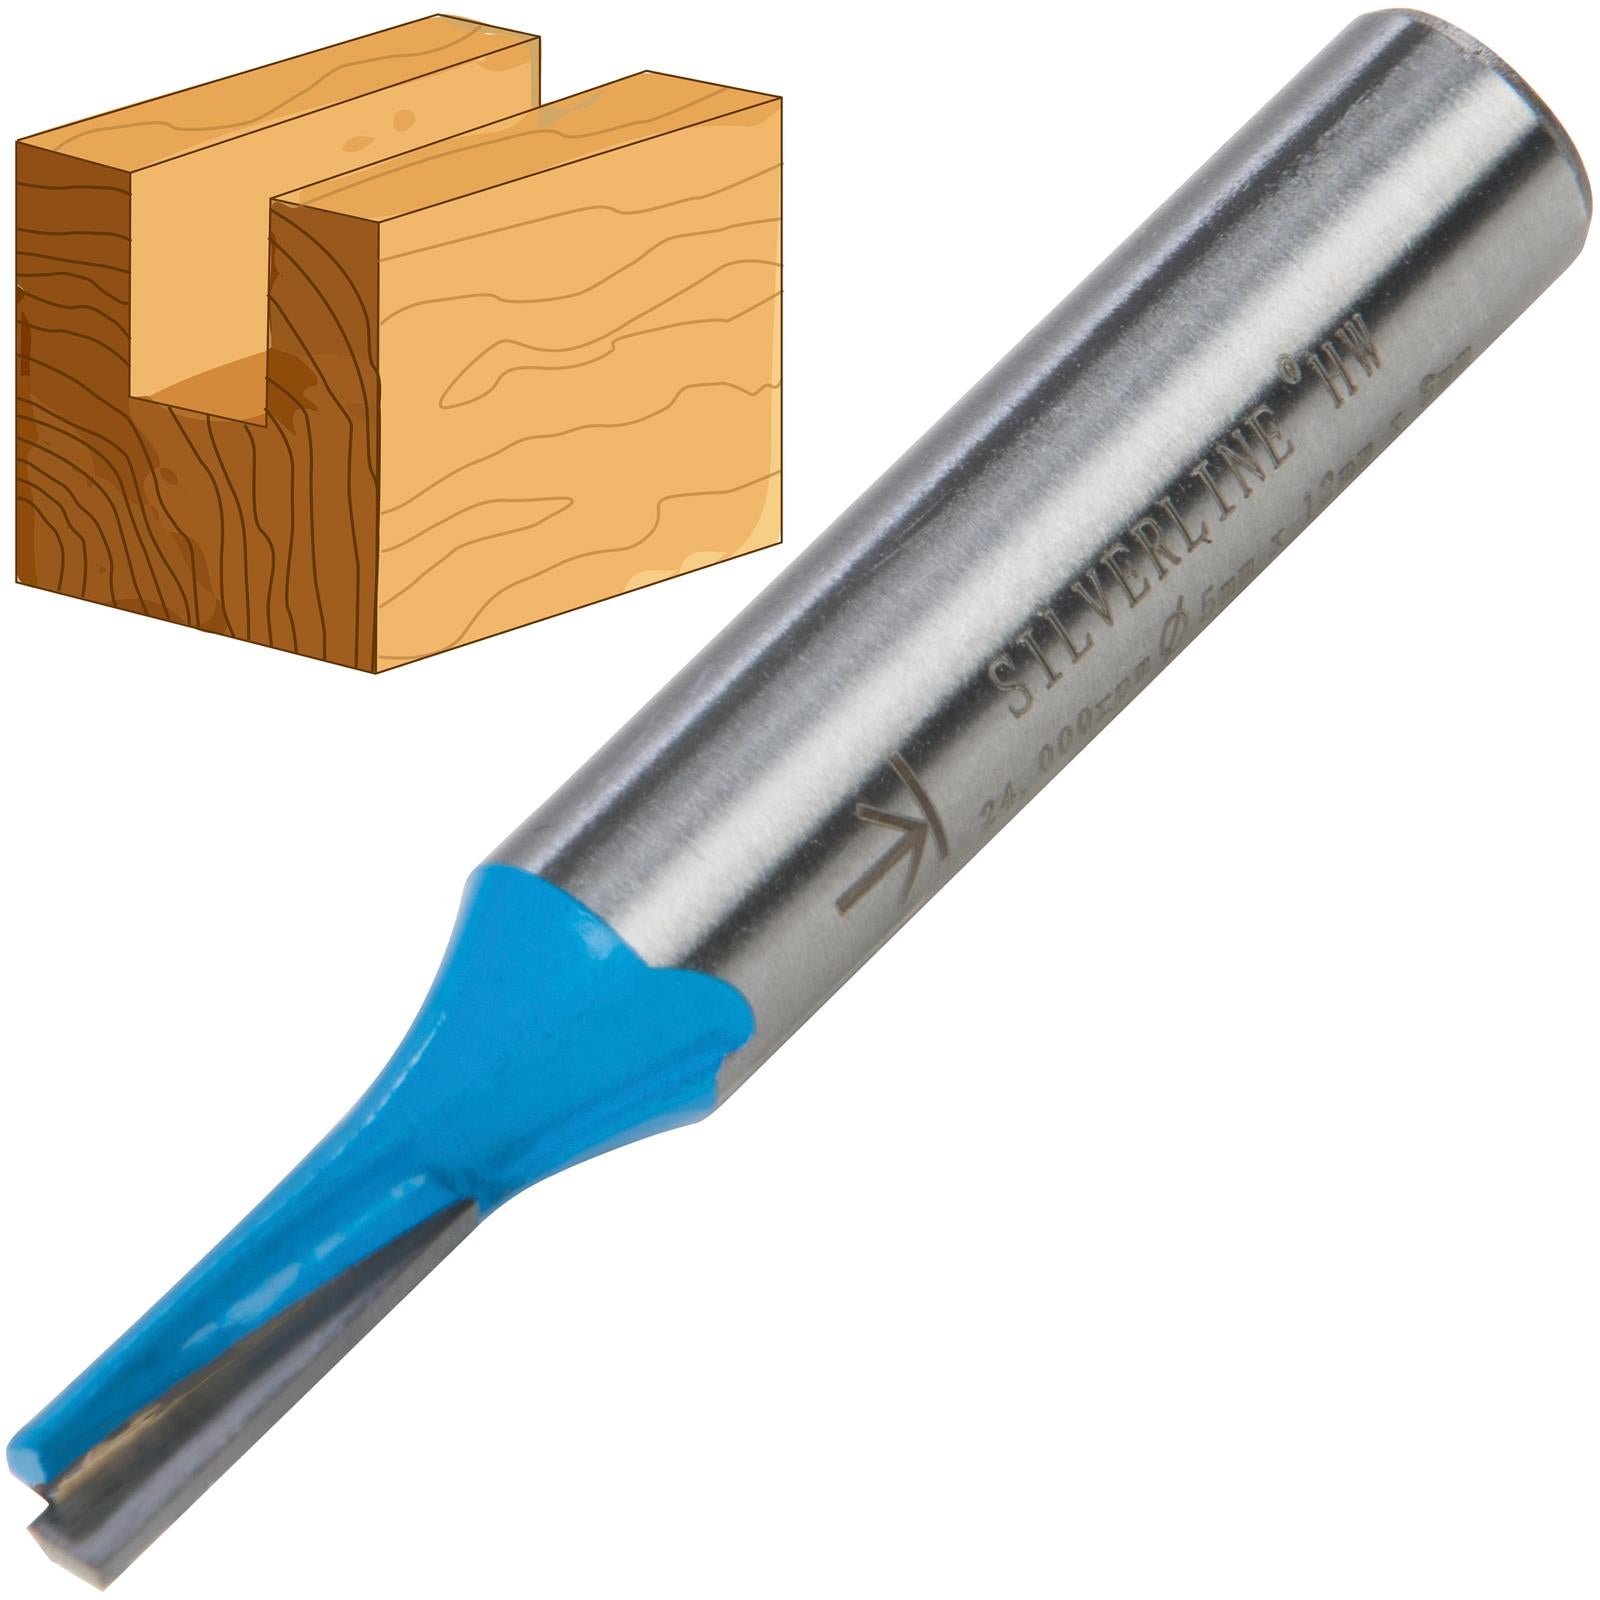 Silverline 8mm Shank Straight Metric Router Bits Cutters